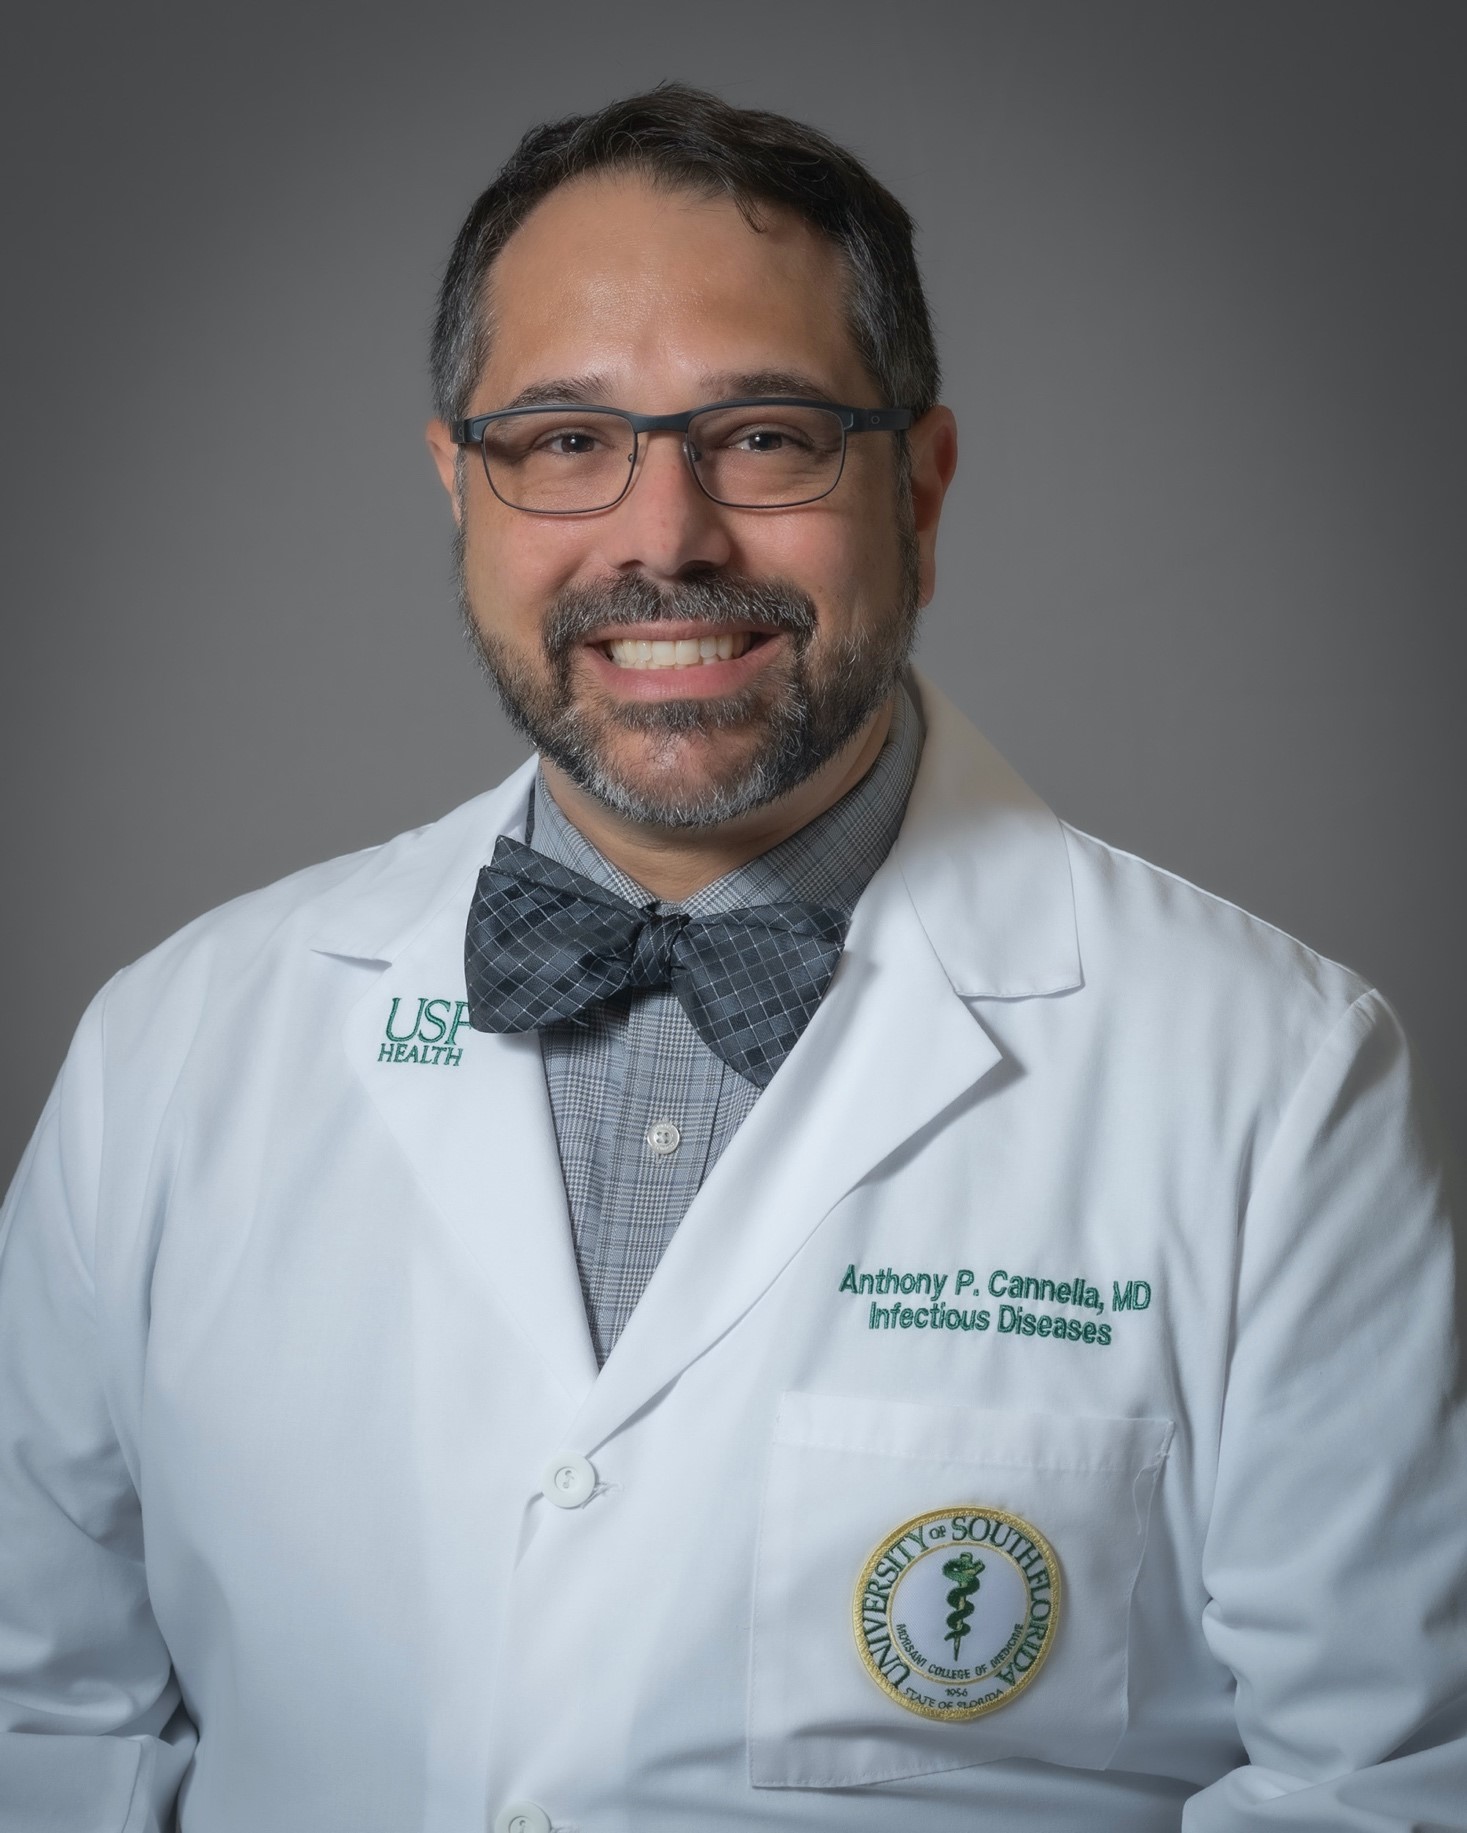 Anthony P. Cannella, MD, MSc, FACP